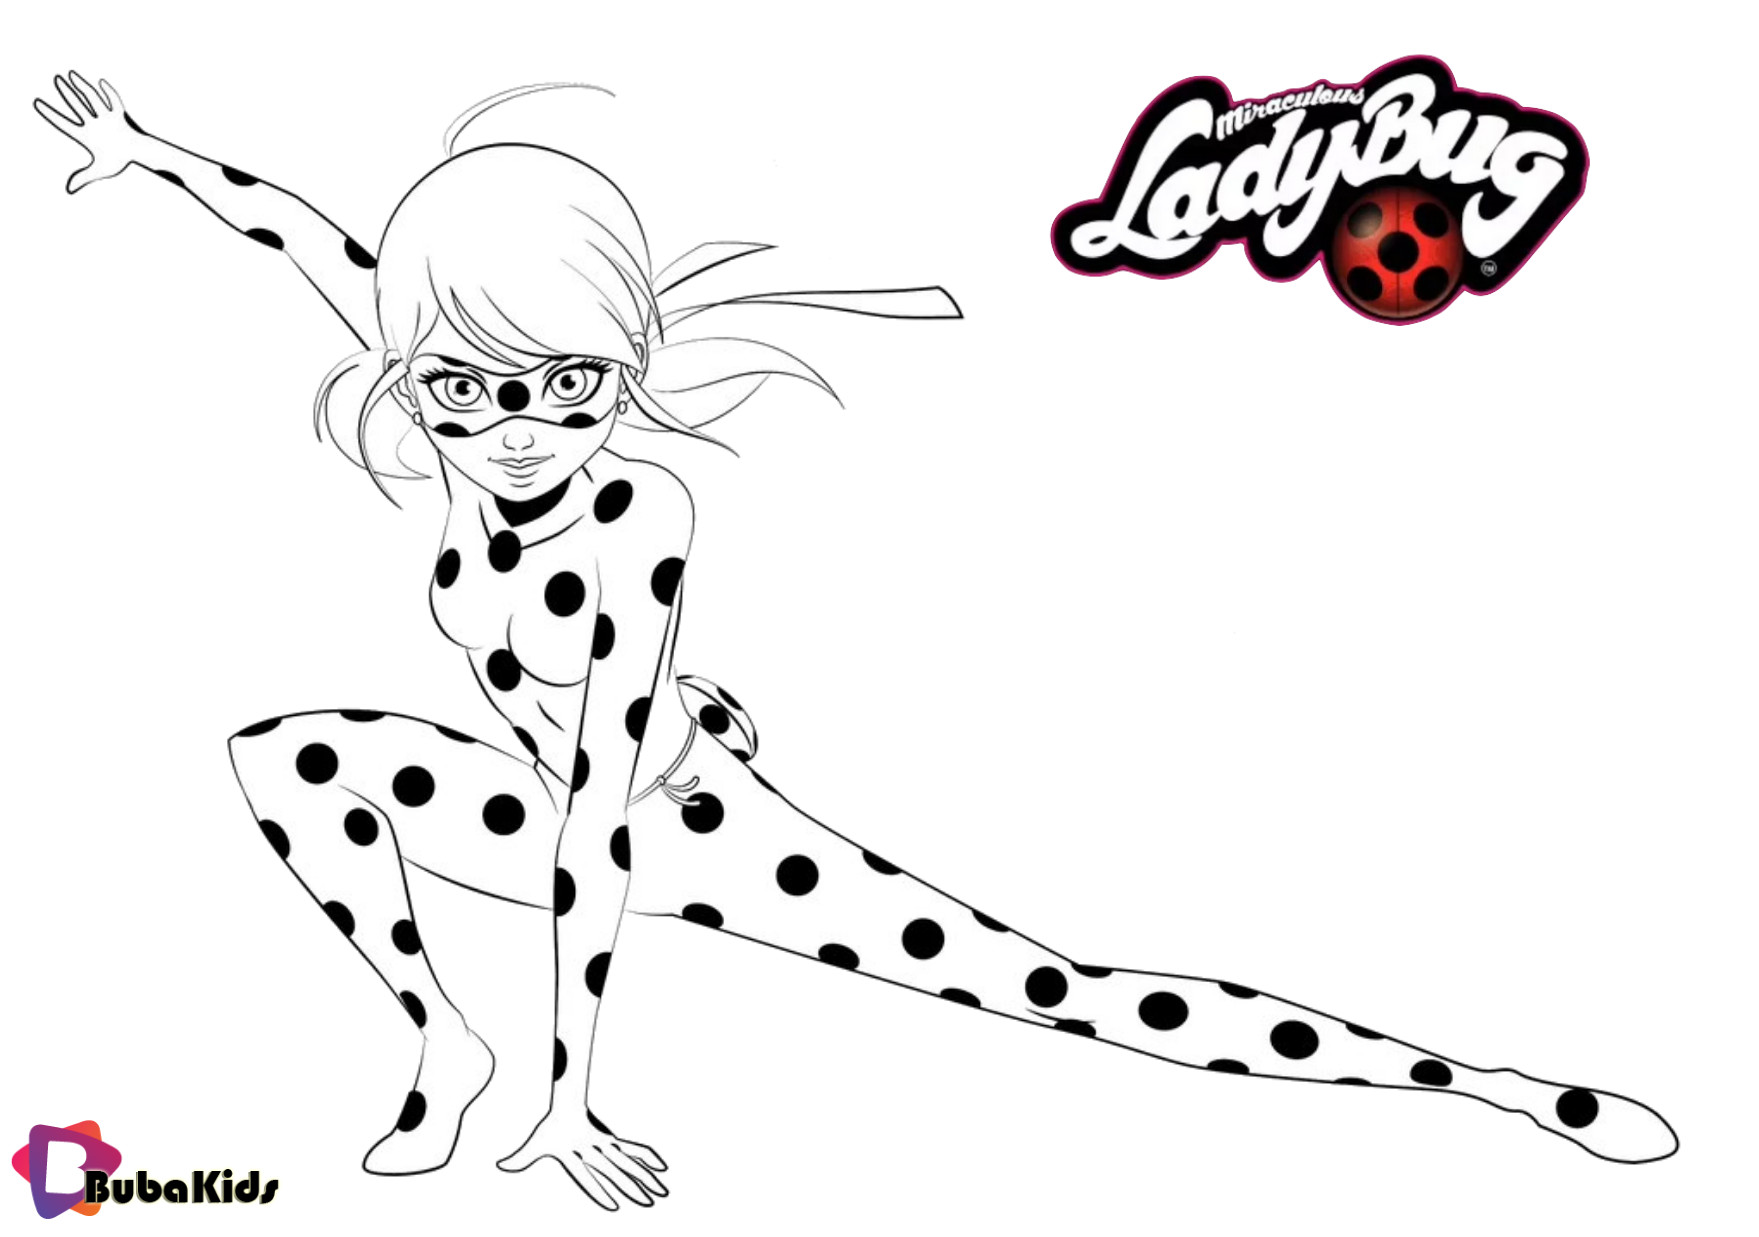 Marinette Dupain-Cheng Miraculous Tales of Ladybug and Cat Noir coloring page